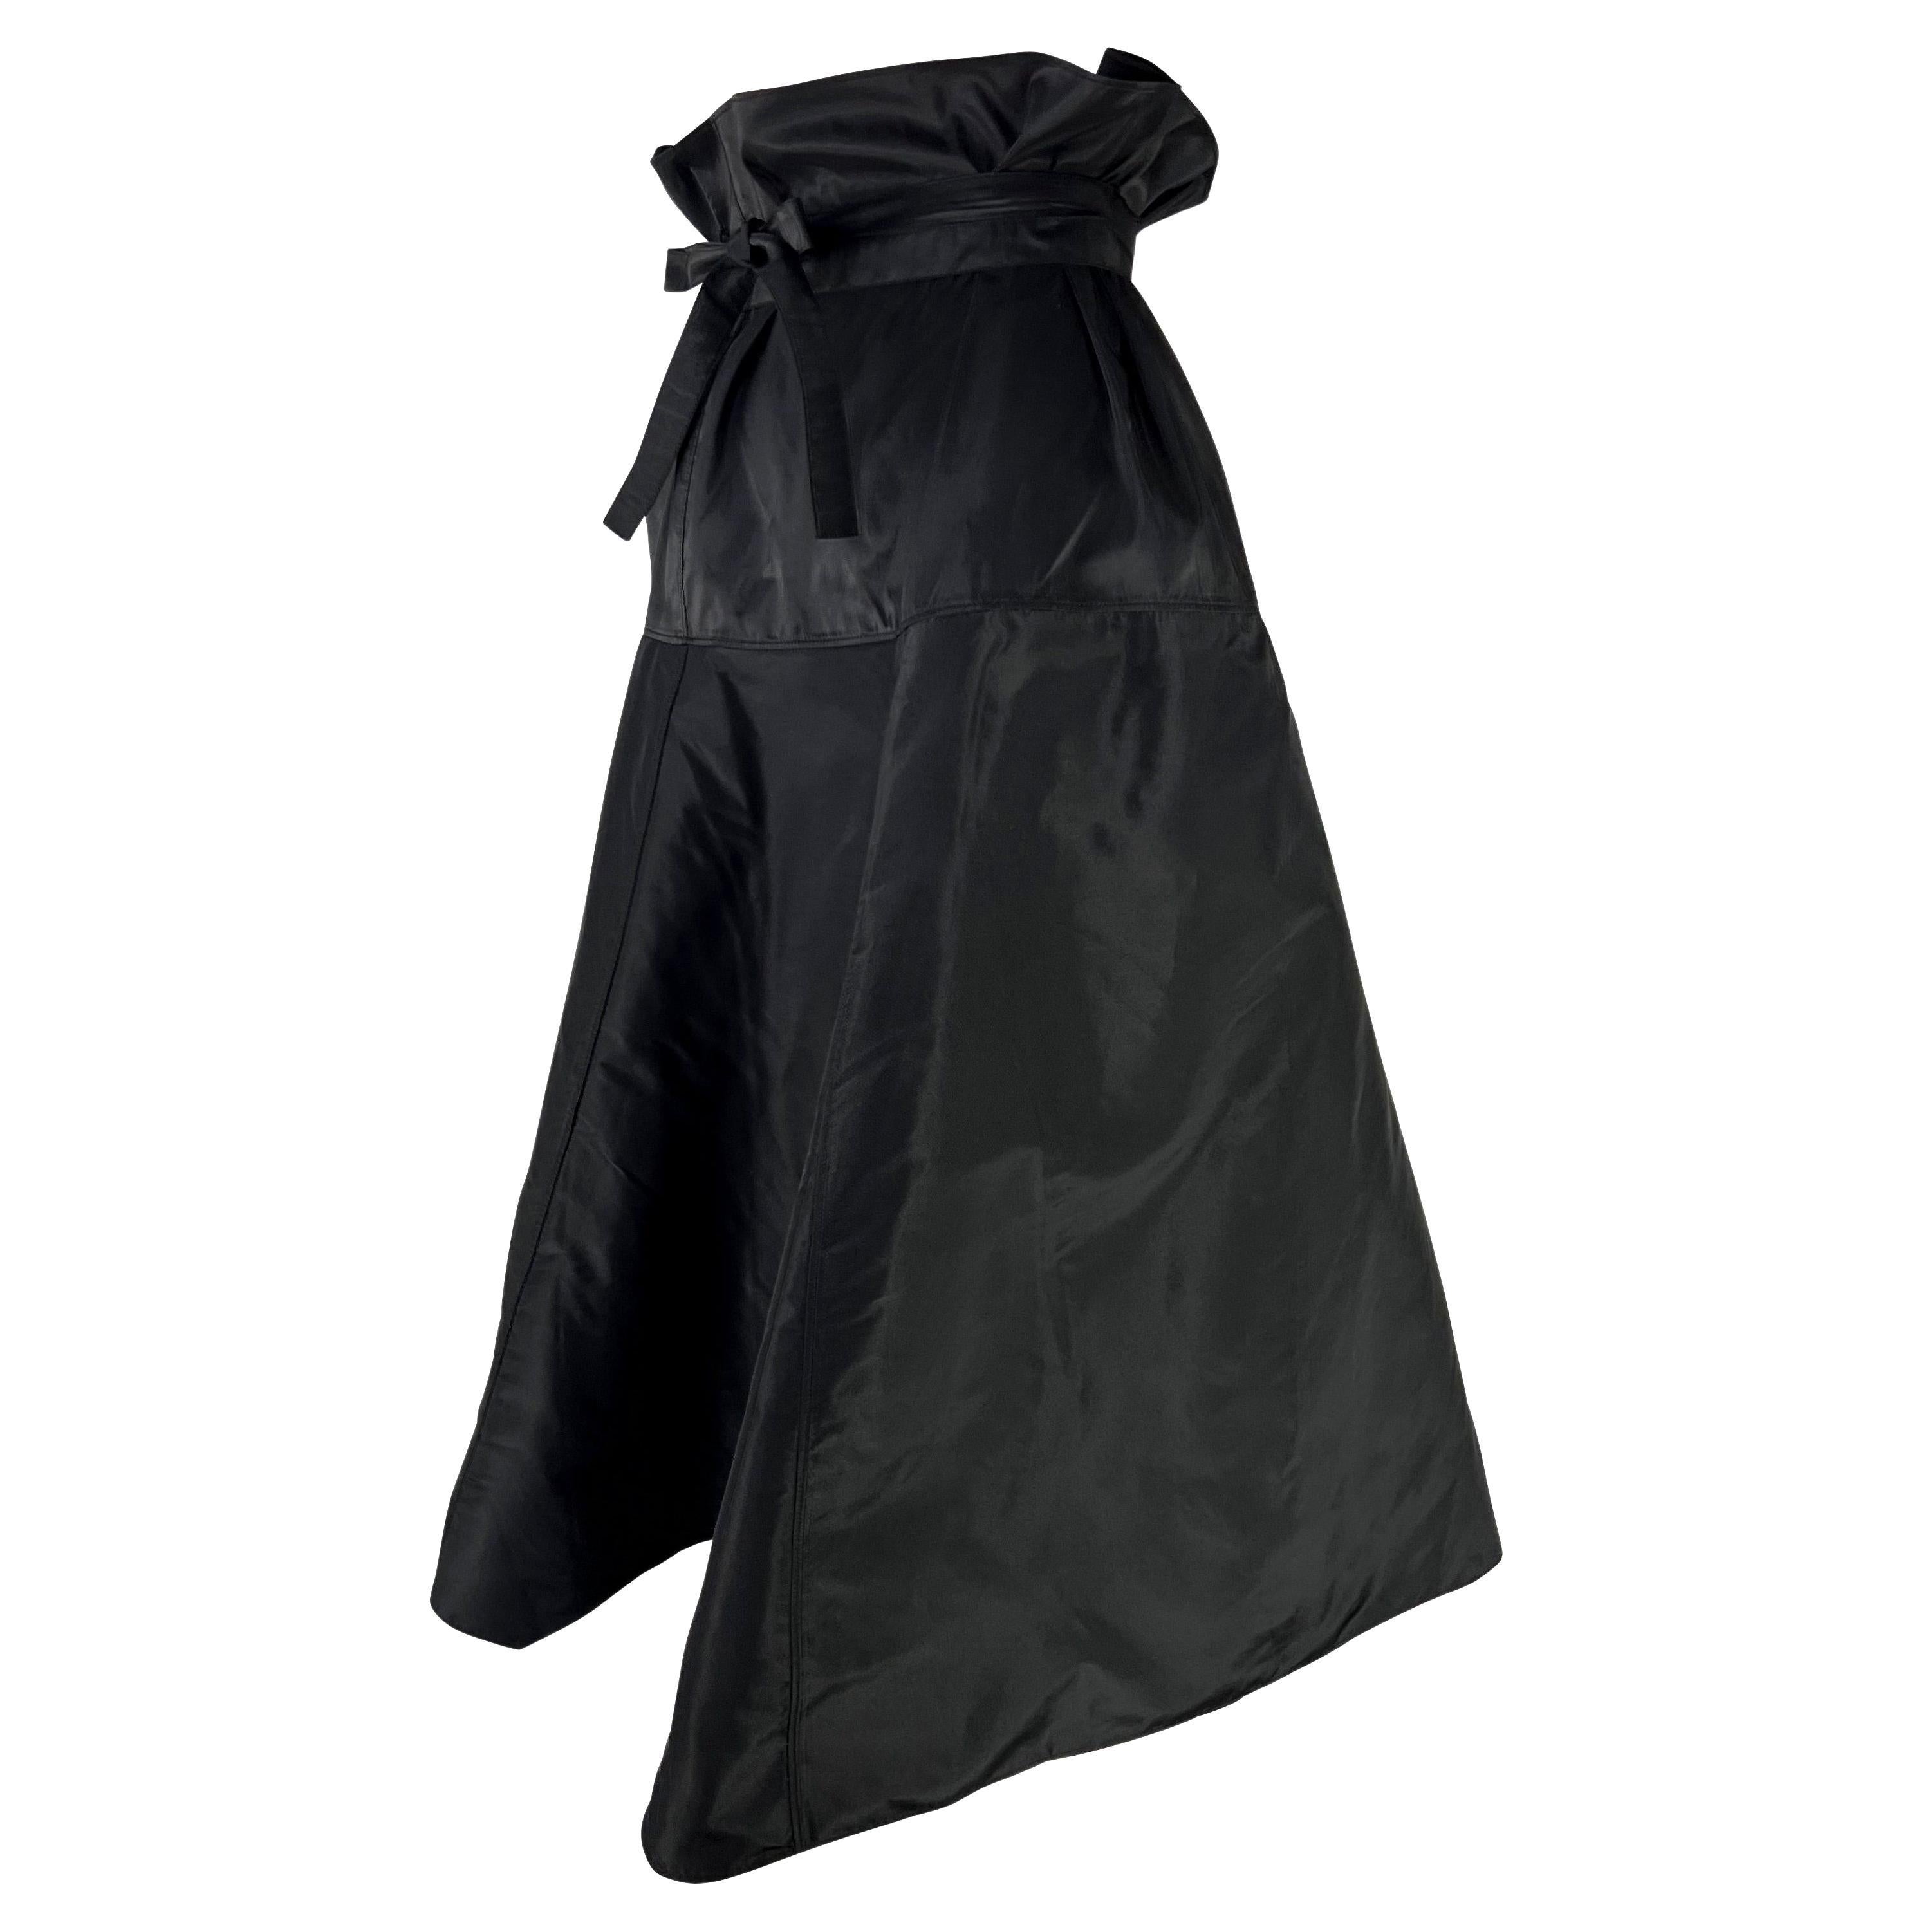 S/S 2002 Gucci by Tom Ford Runway Black Silk Taffeta Belted Wrap Oversized Skirt In Excellent Condition For Sale In West Hollywood, CA